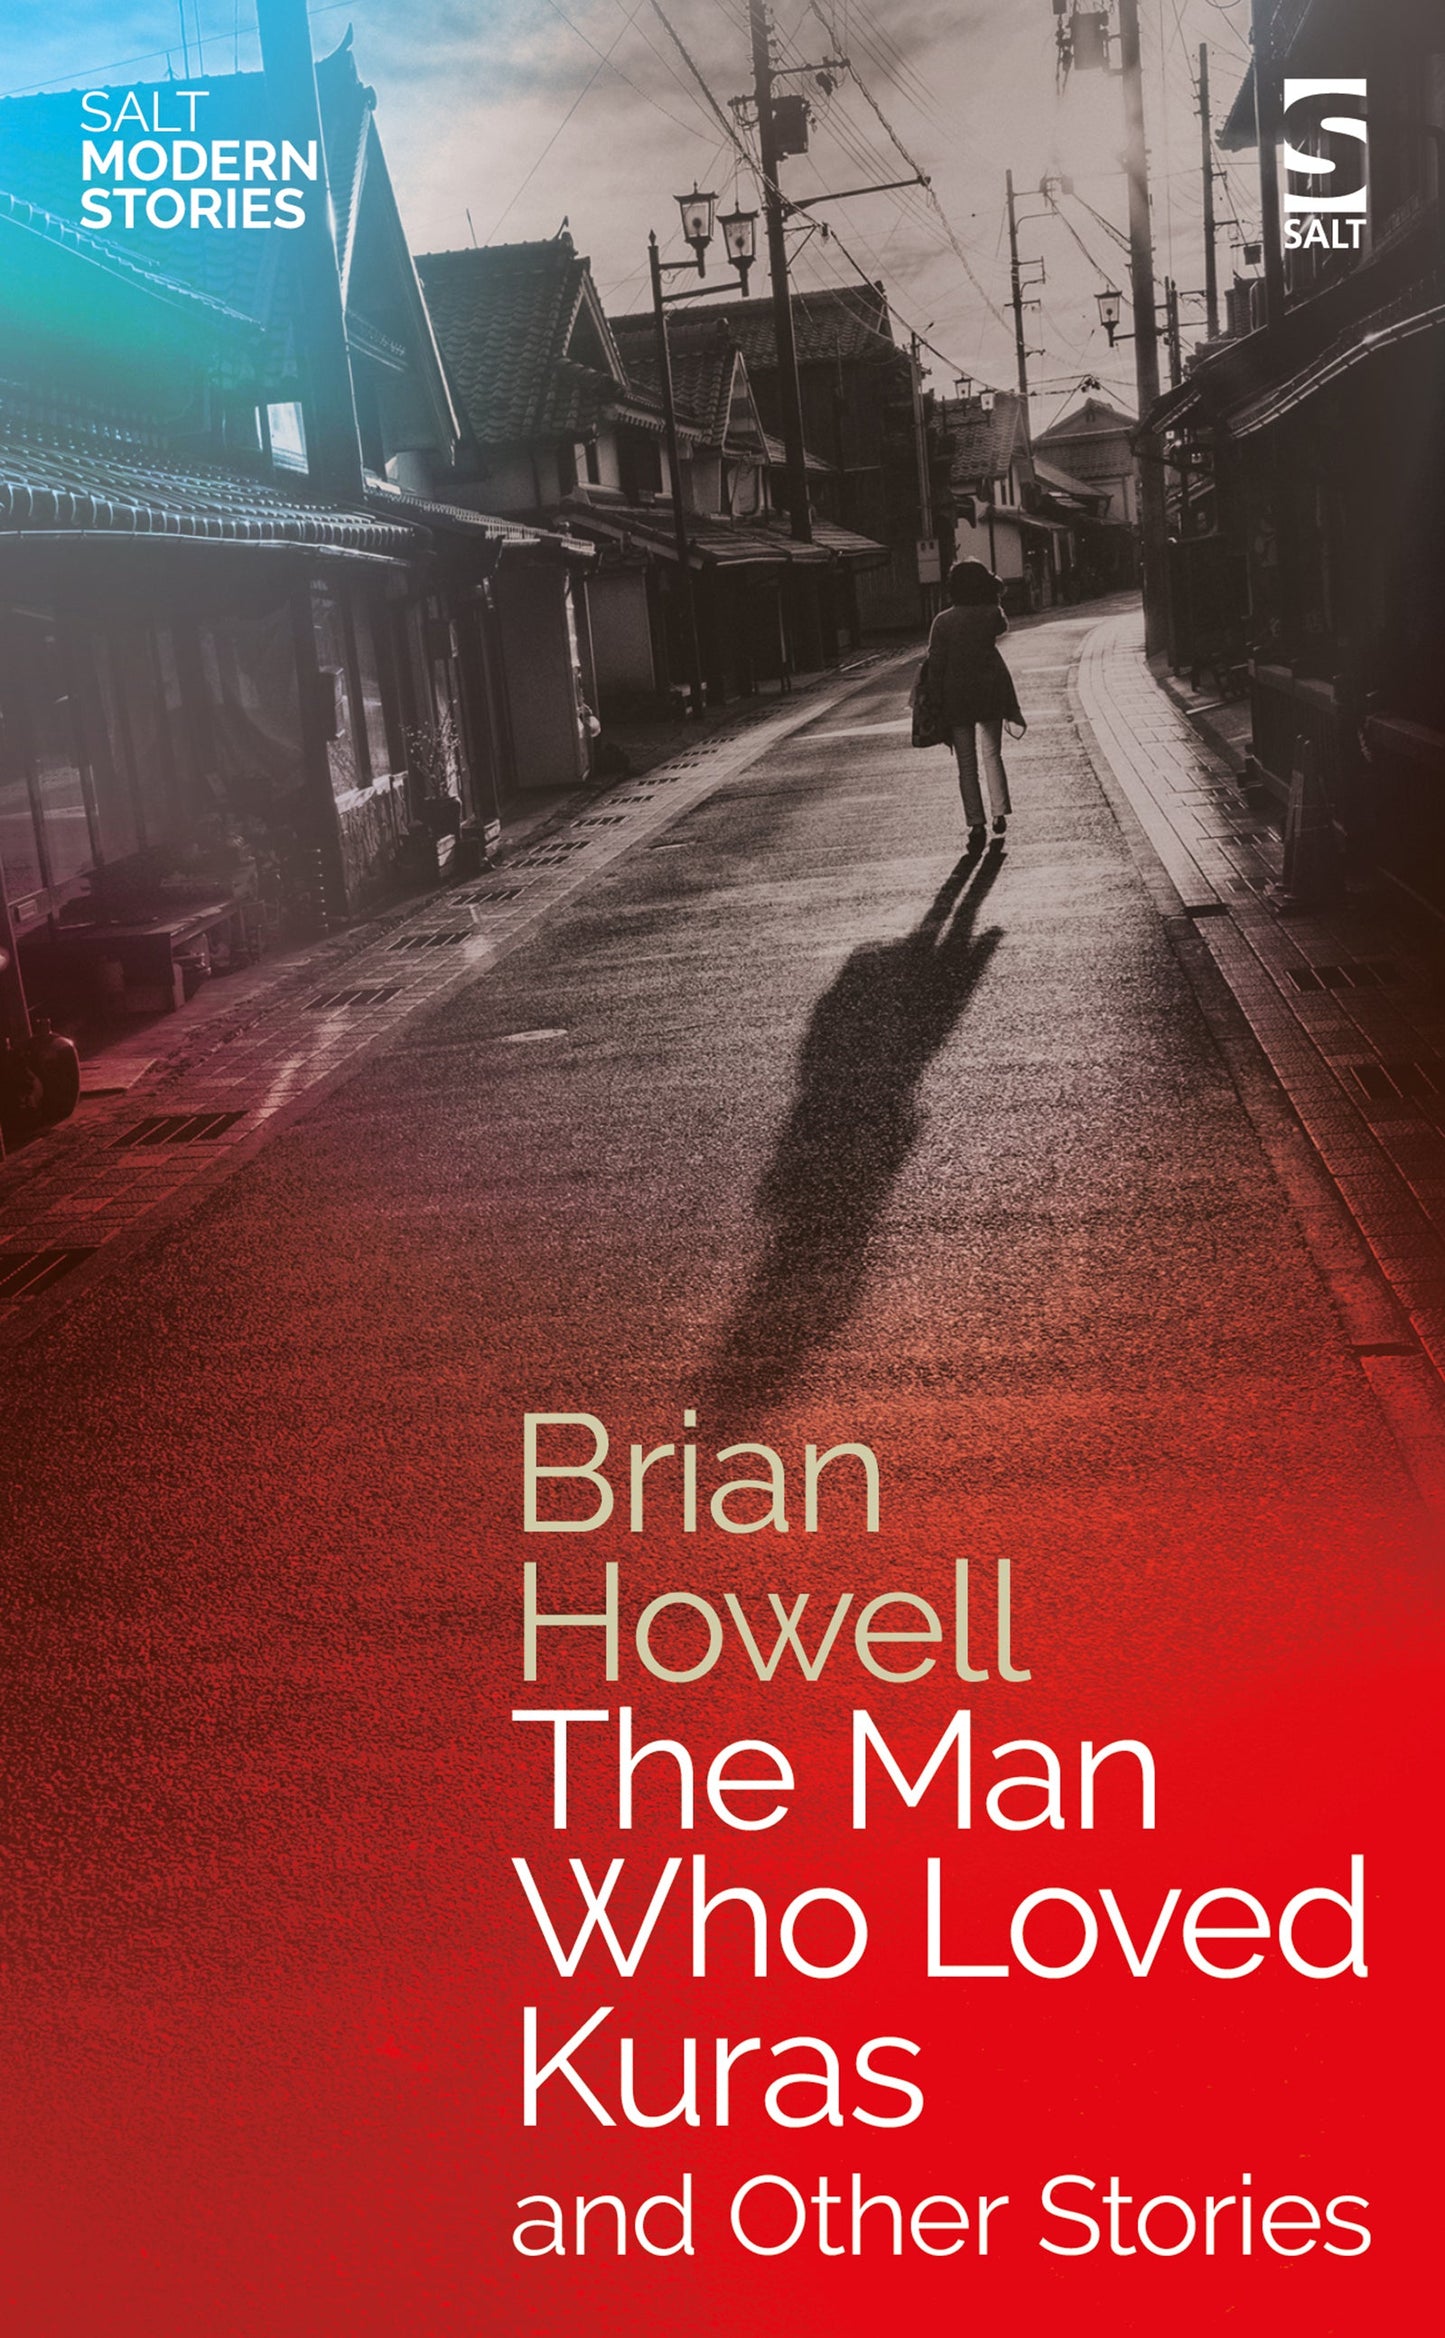 The Man Who Loved Kuras and Other Stories by Brian Howell